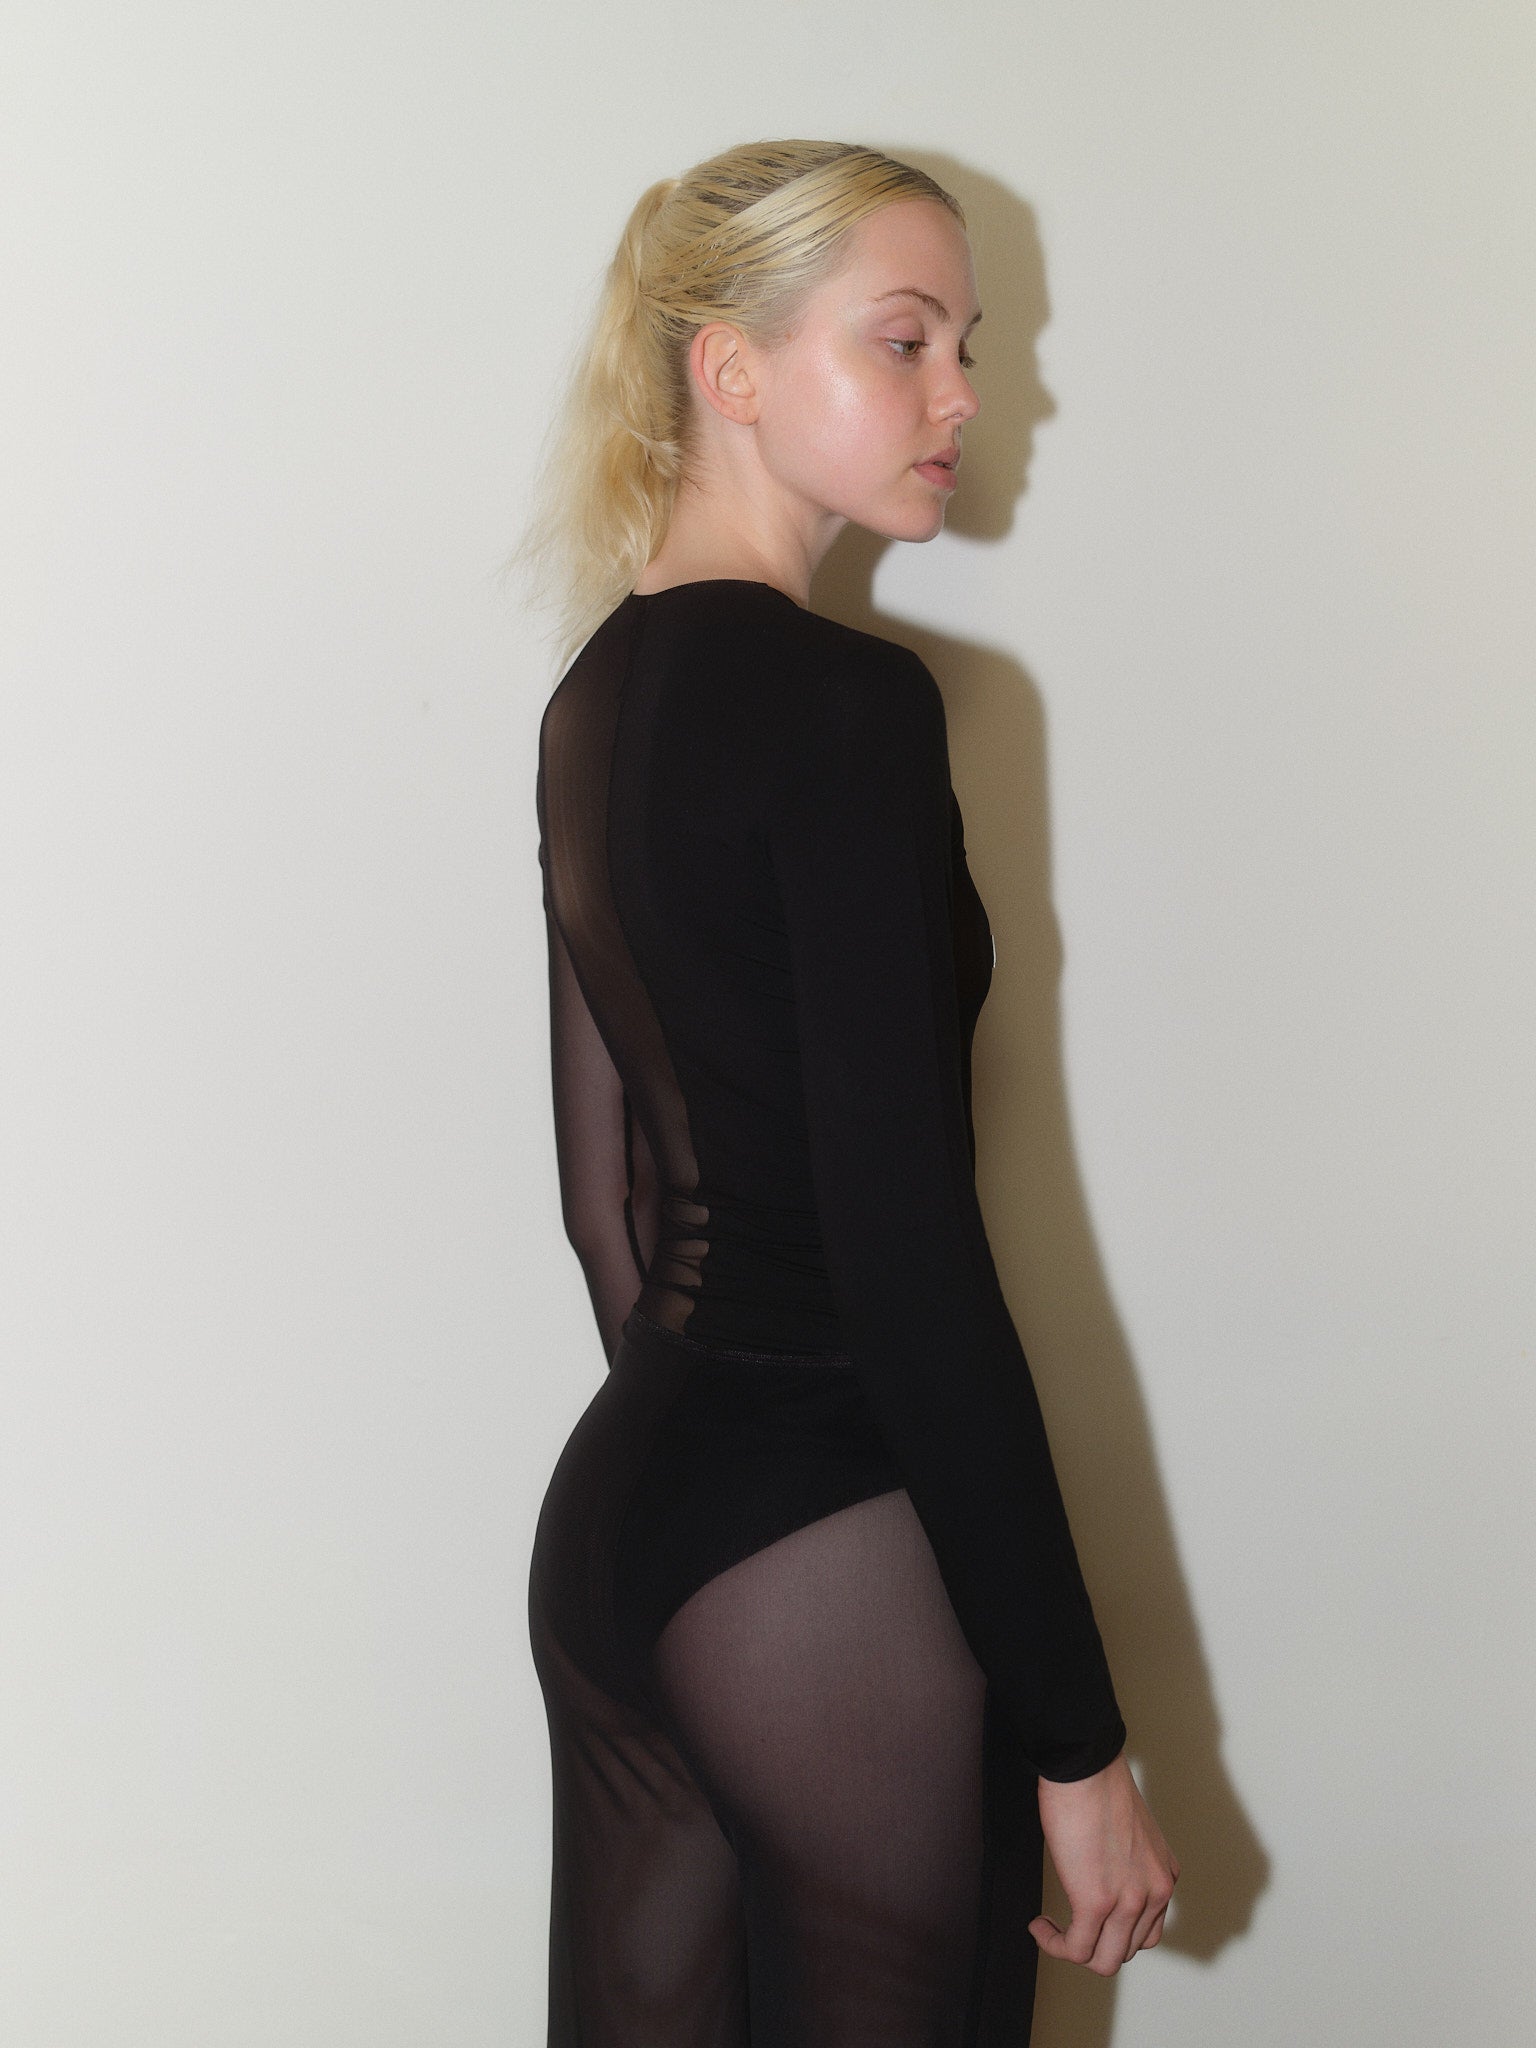 Split Bamboo Viscose Bodysuit designed by Christina Seewald. Sustainable, designed and made in Europe.